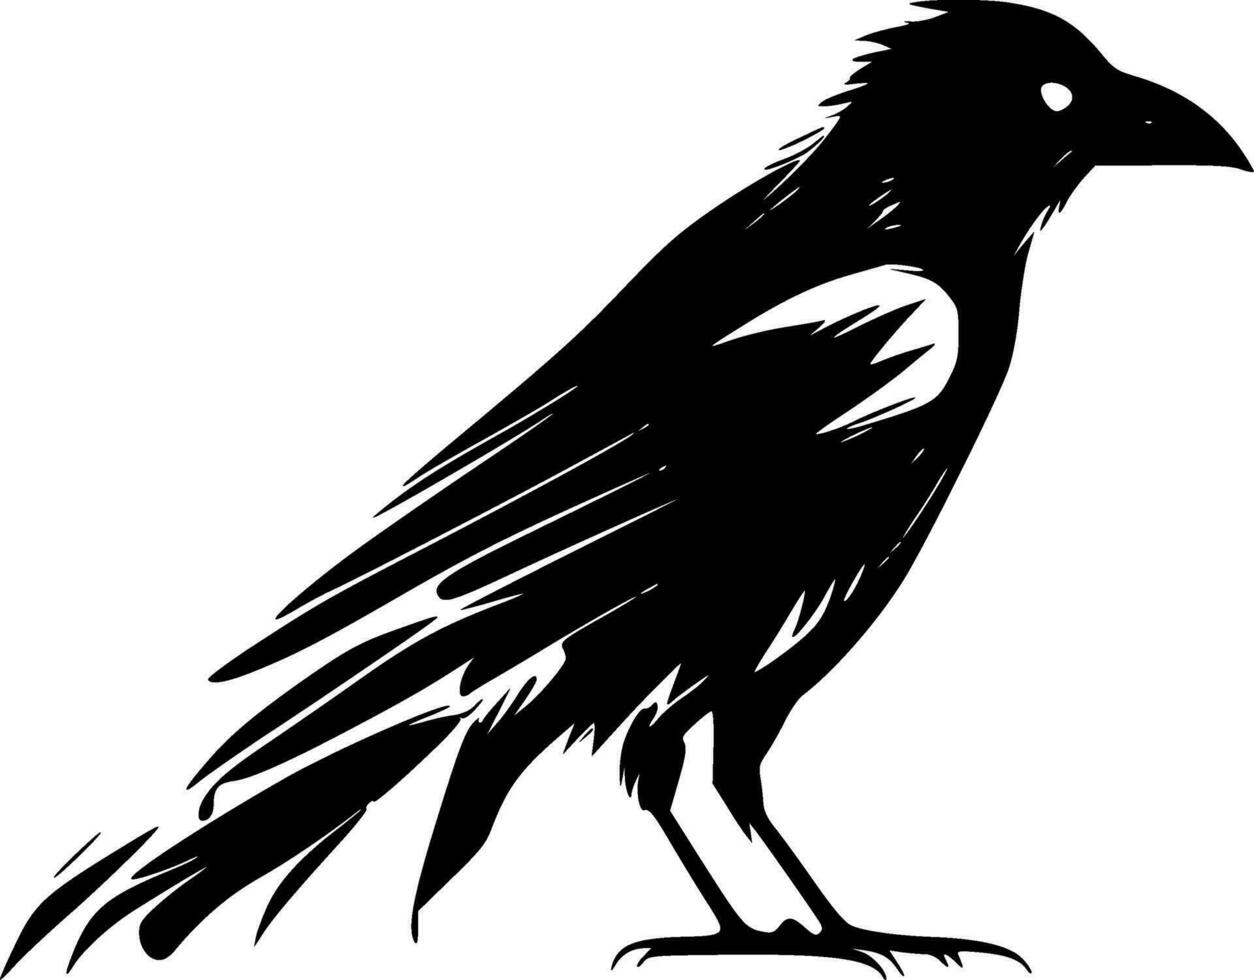 Crow - High Quality Vector Logo - Vector illustration ideal for T-shirt graphic